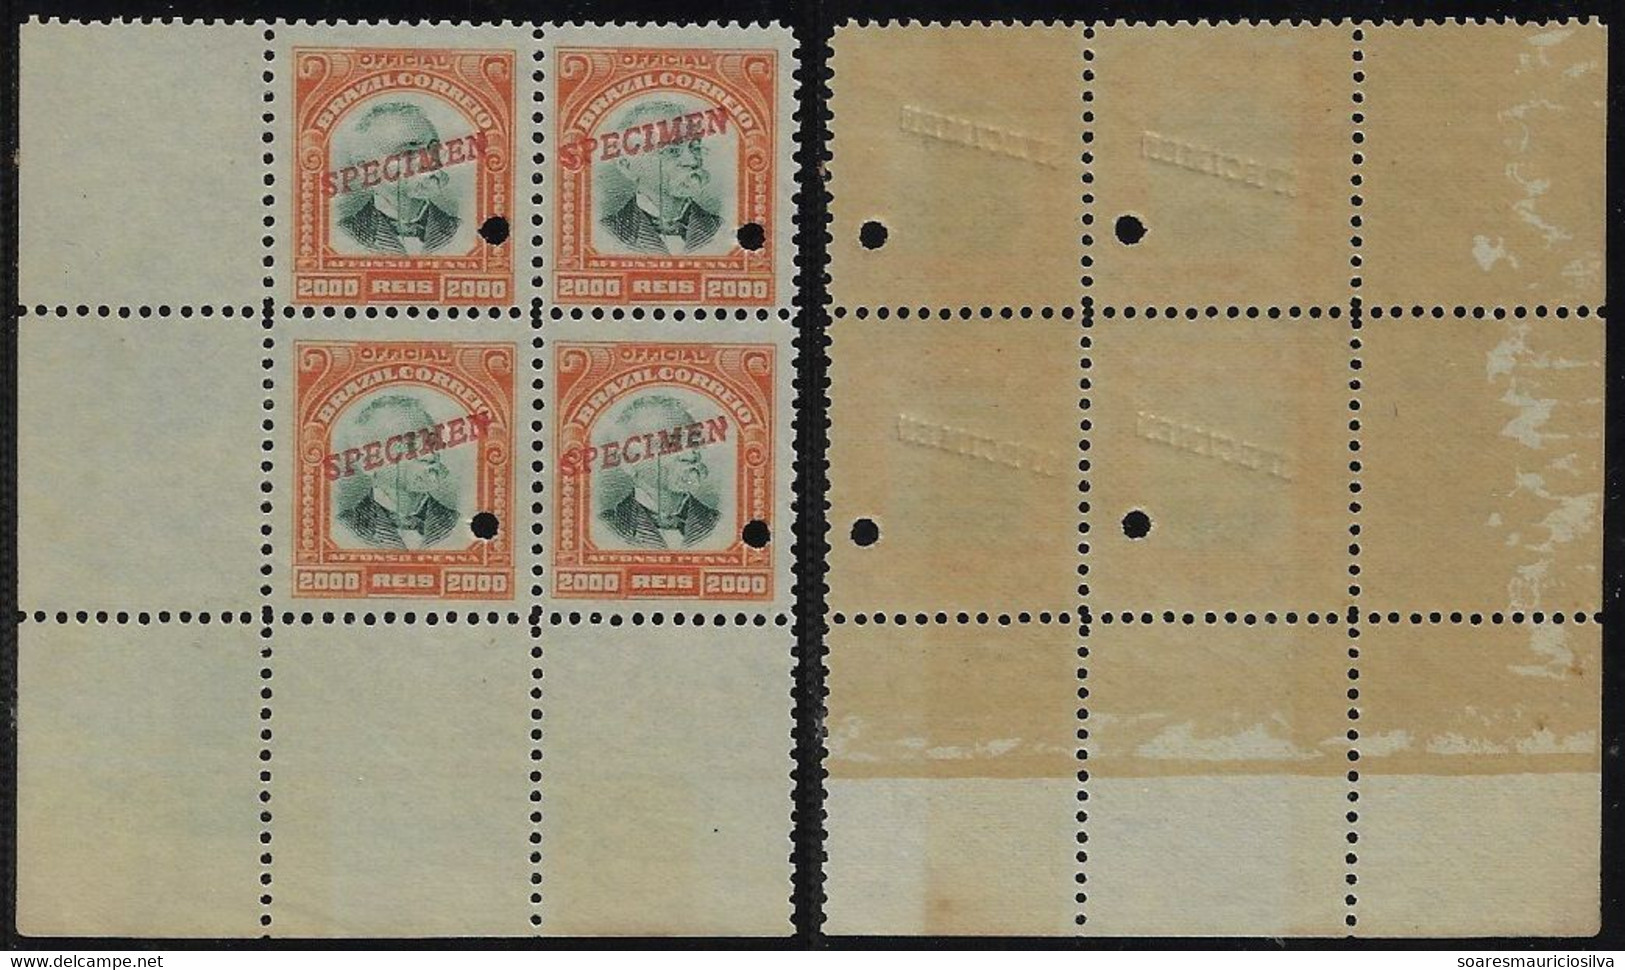 Brazil 1906 RHM-Official-11 President Afonso Pena 2,000 Réis Block Of 4 Stamp With Hole And Overprint Specimen Unused - Officials